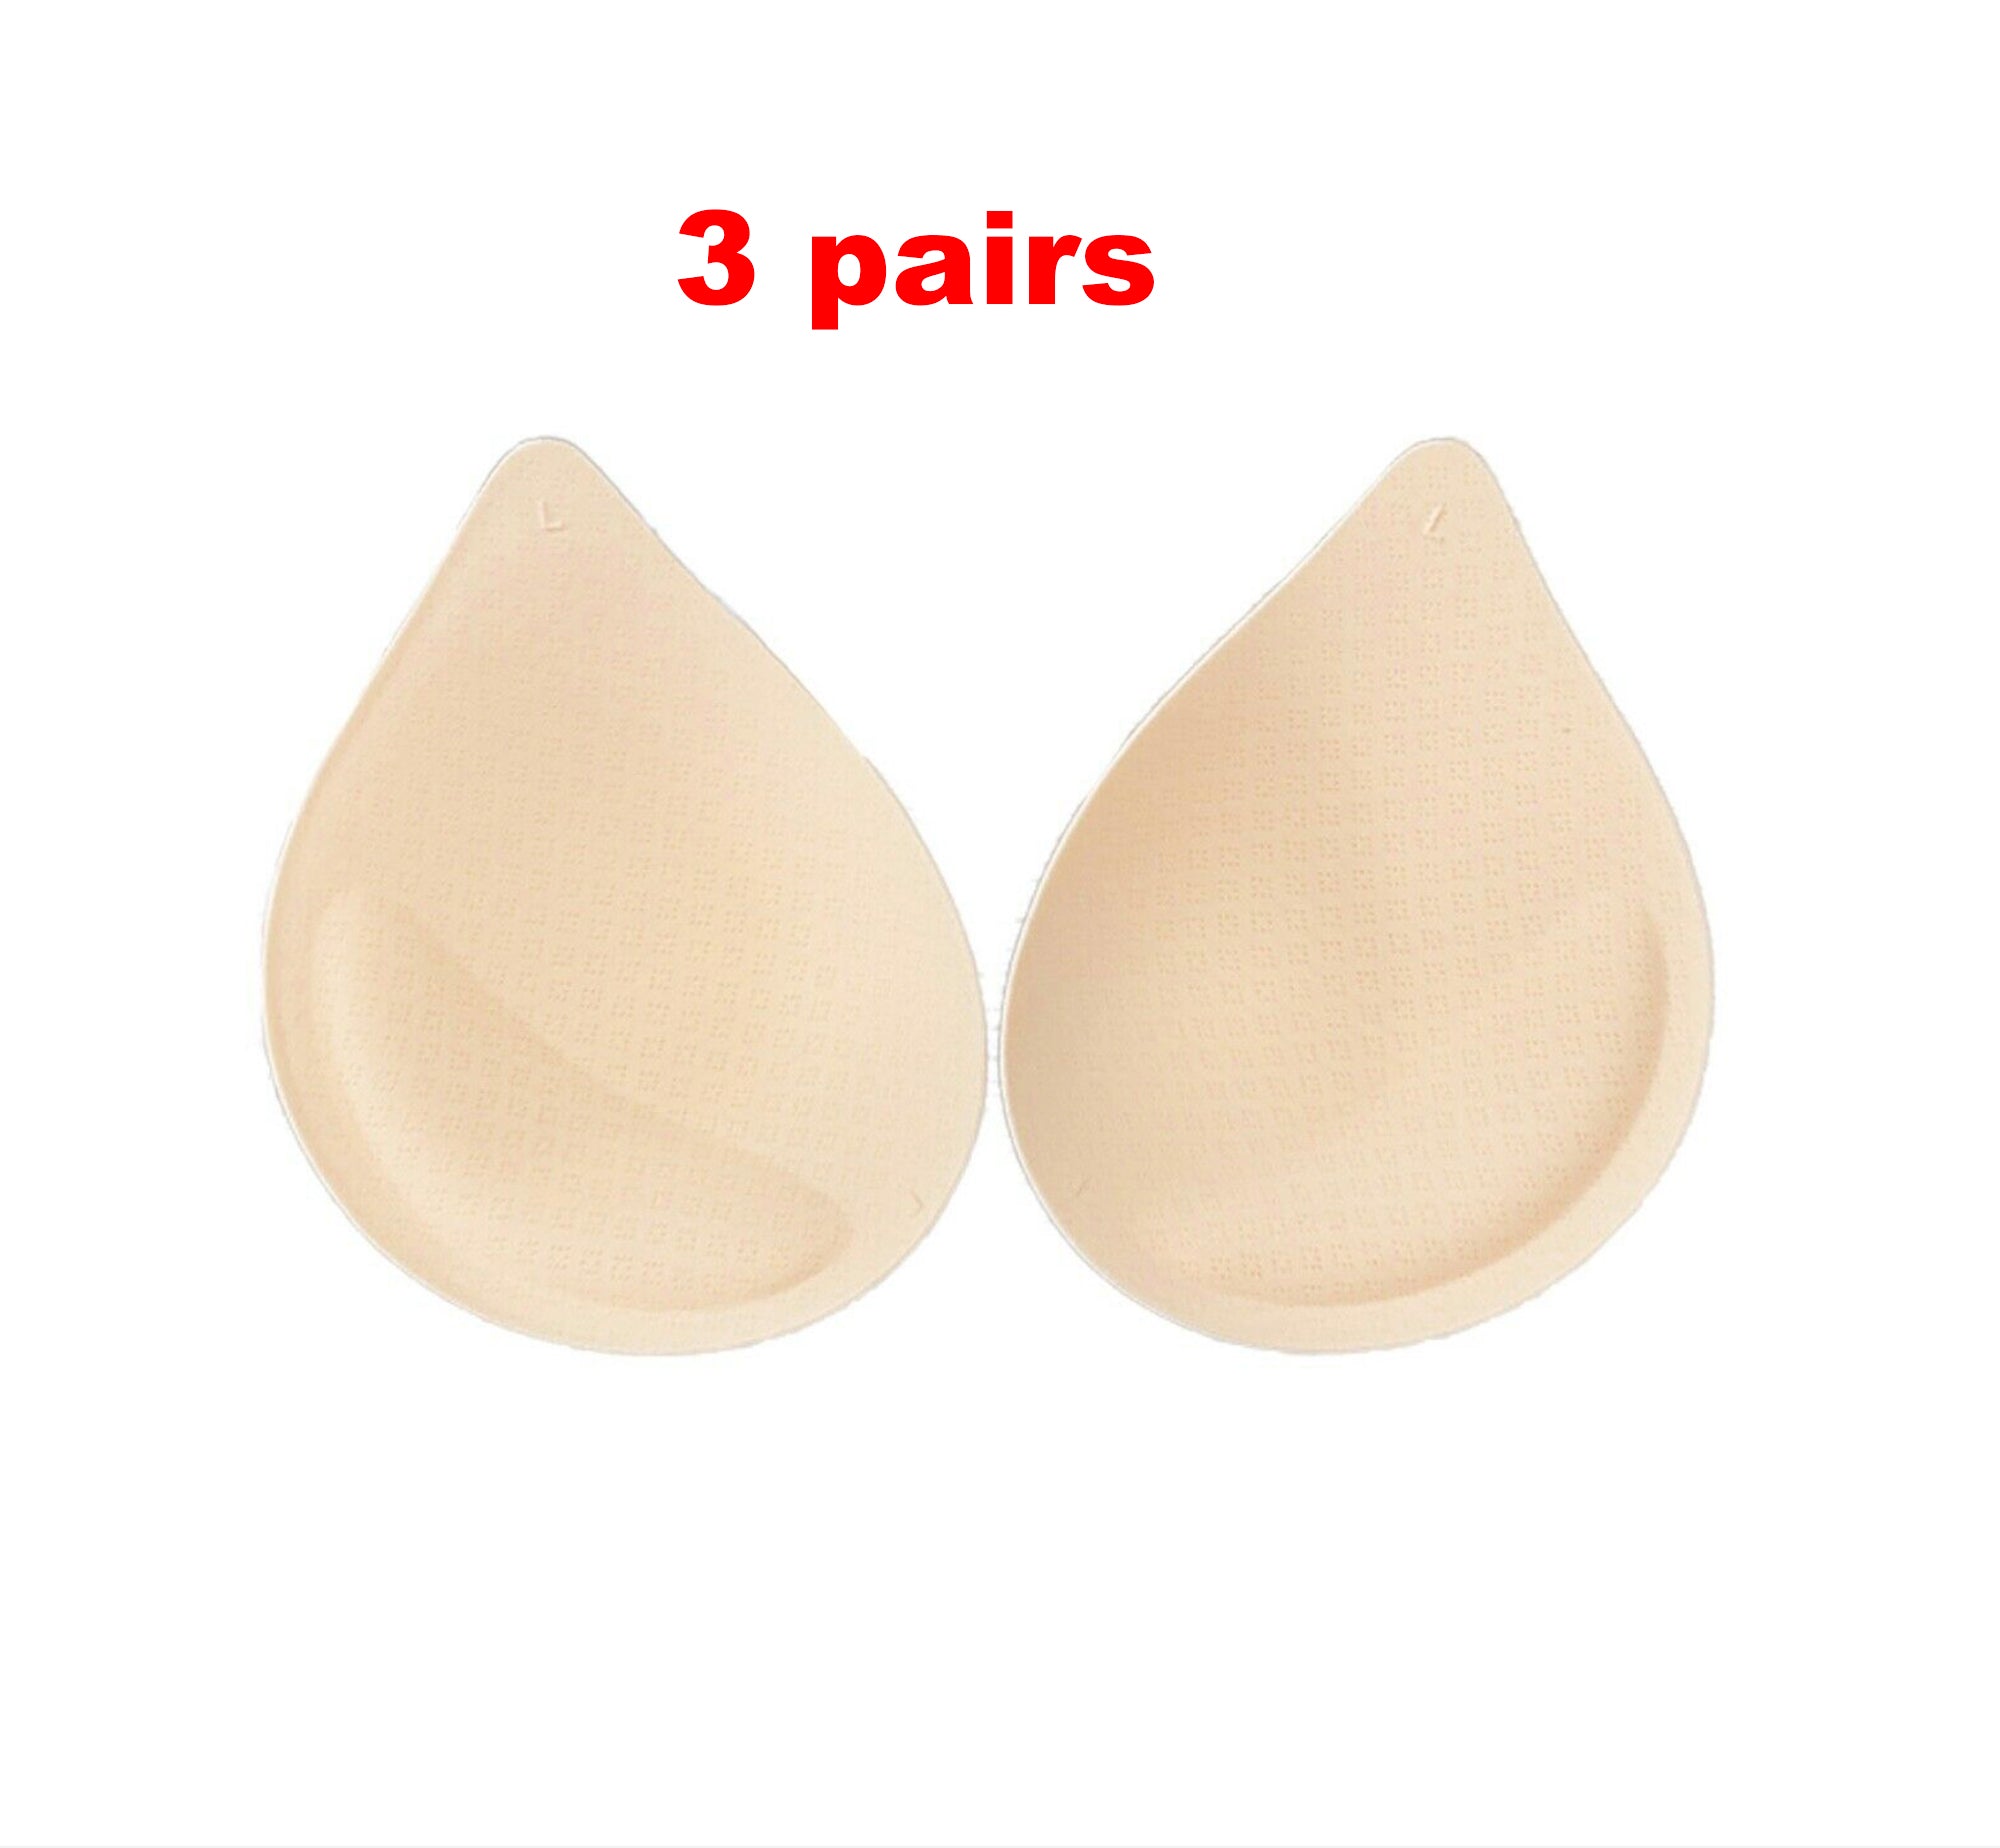 Pair of Push-up Bra Cup Inserts